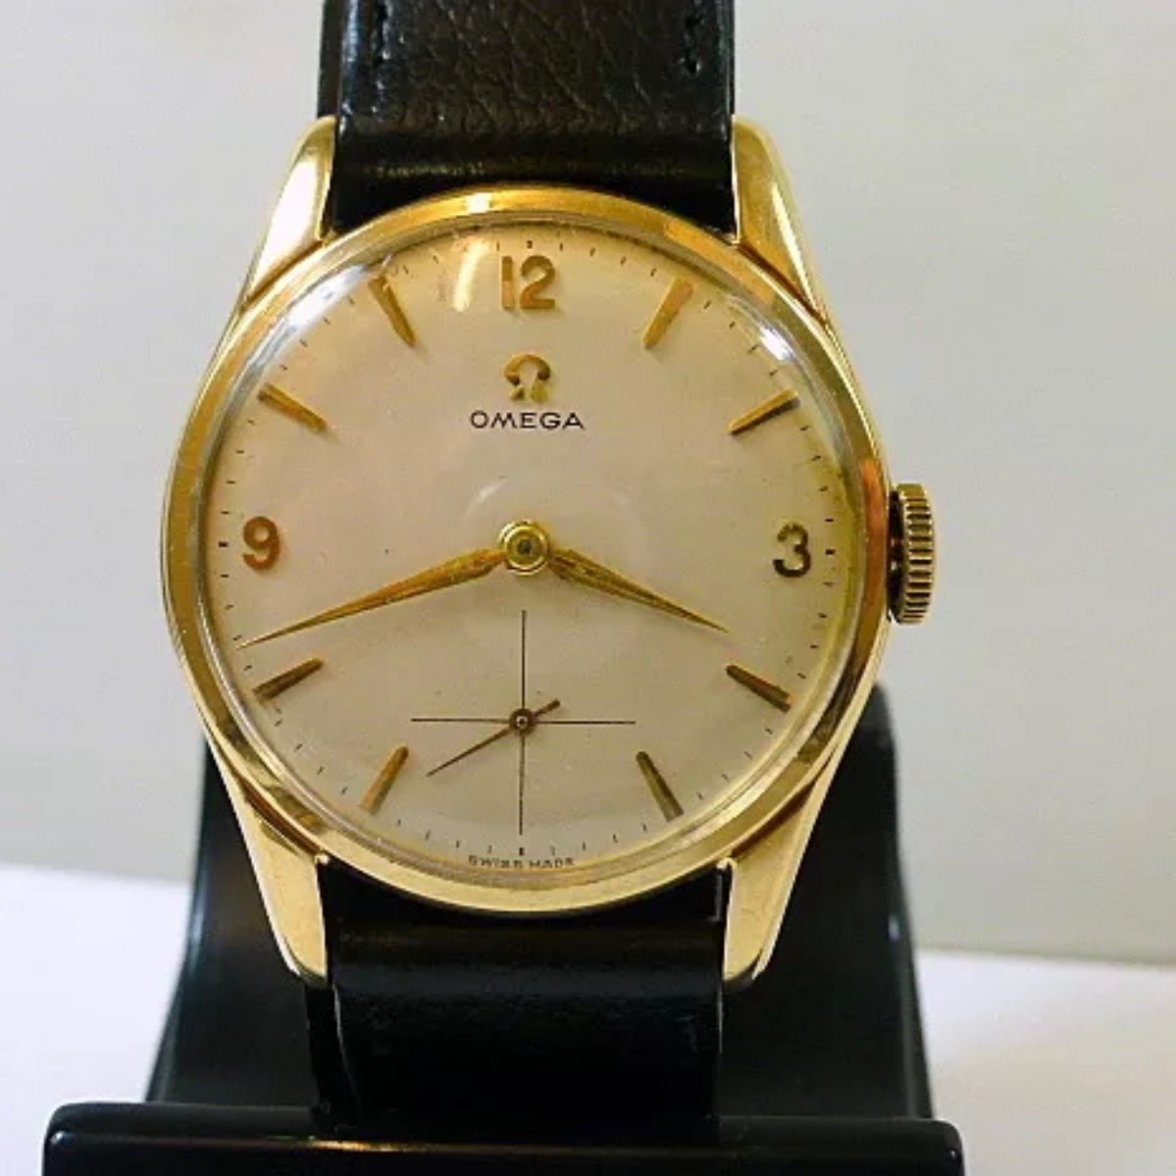 opinions on this old cal.268 Omega 